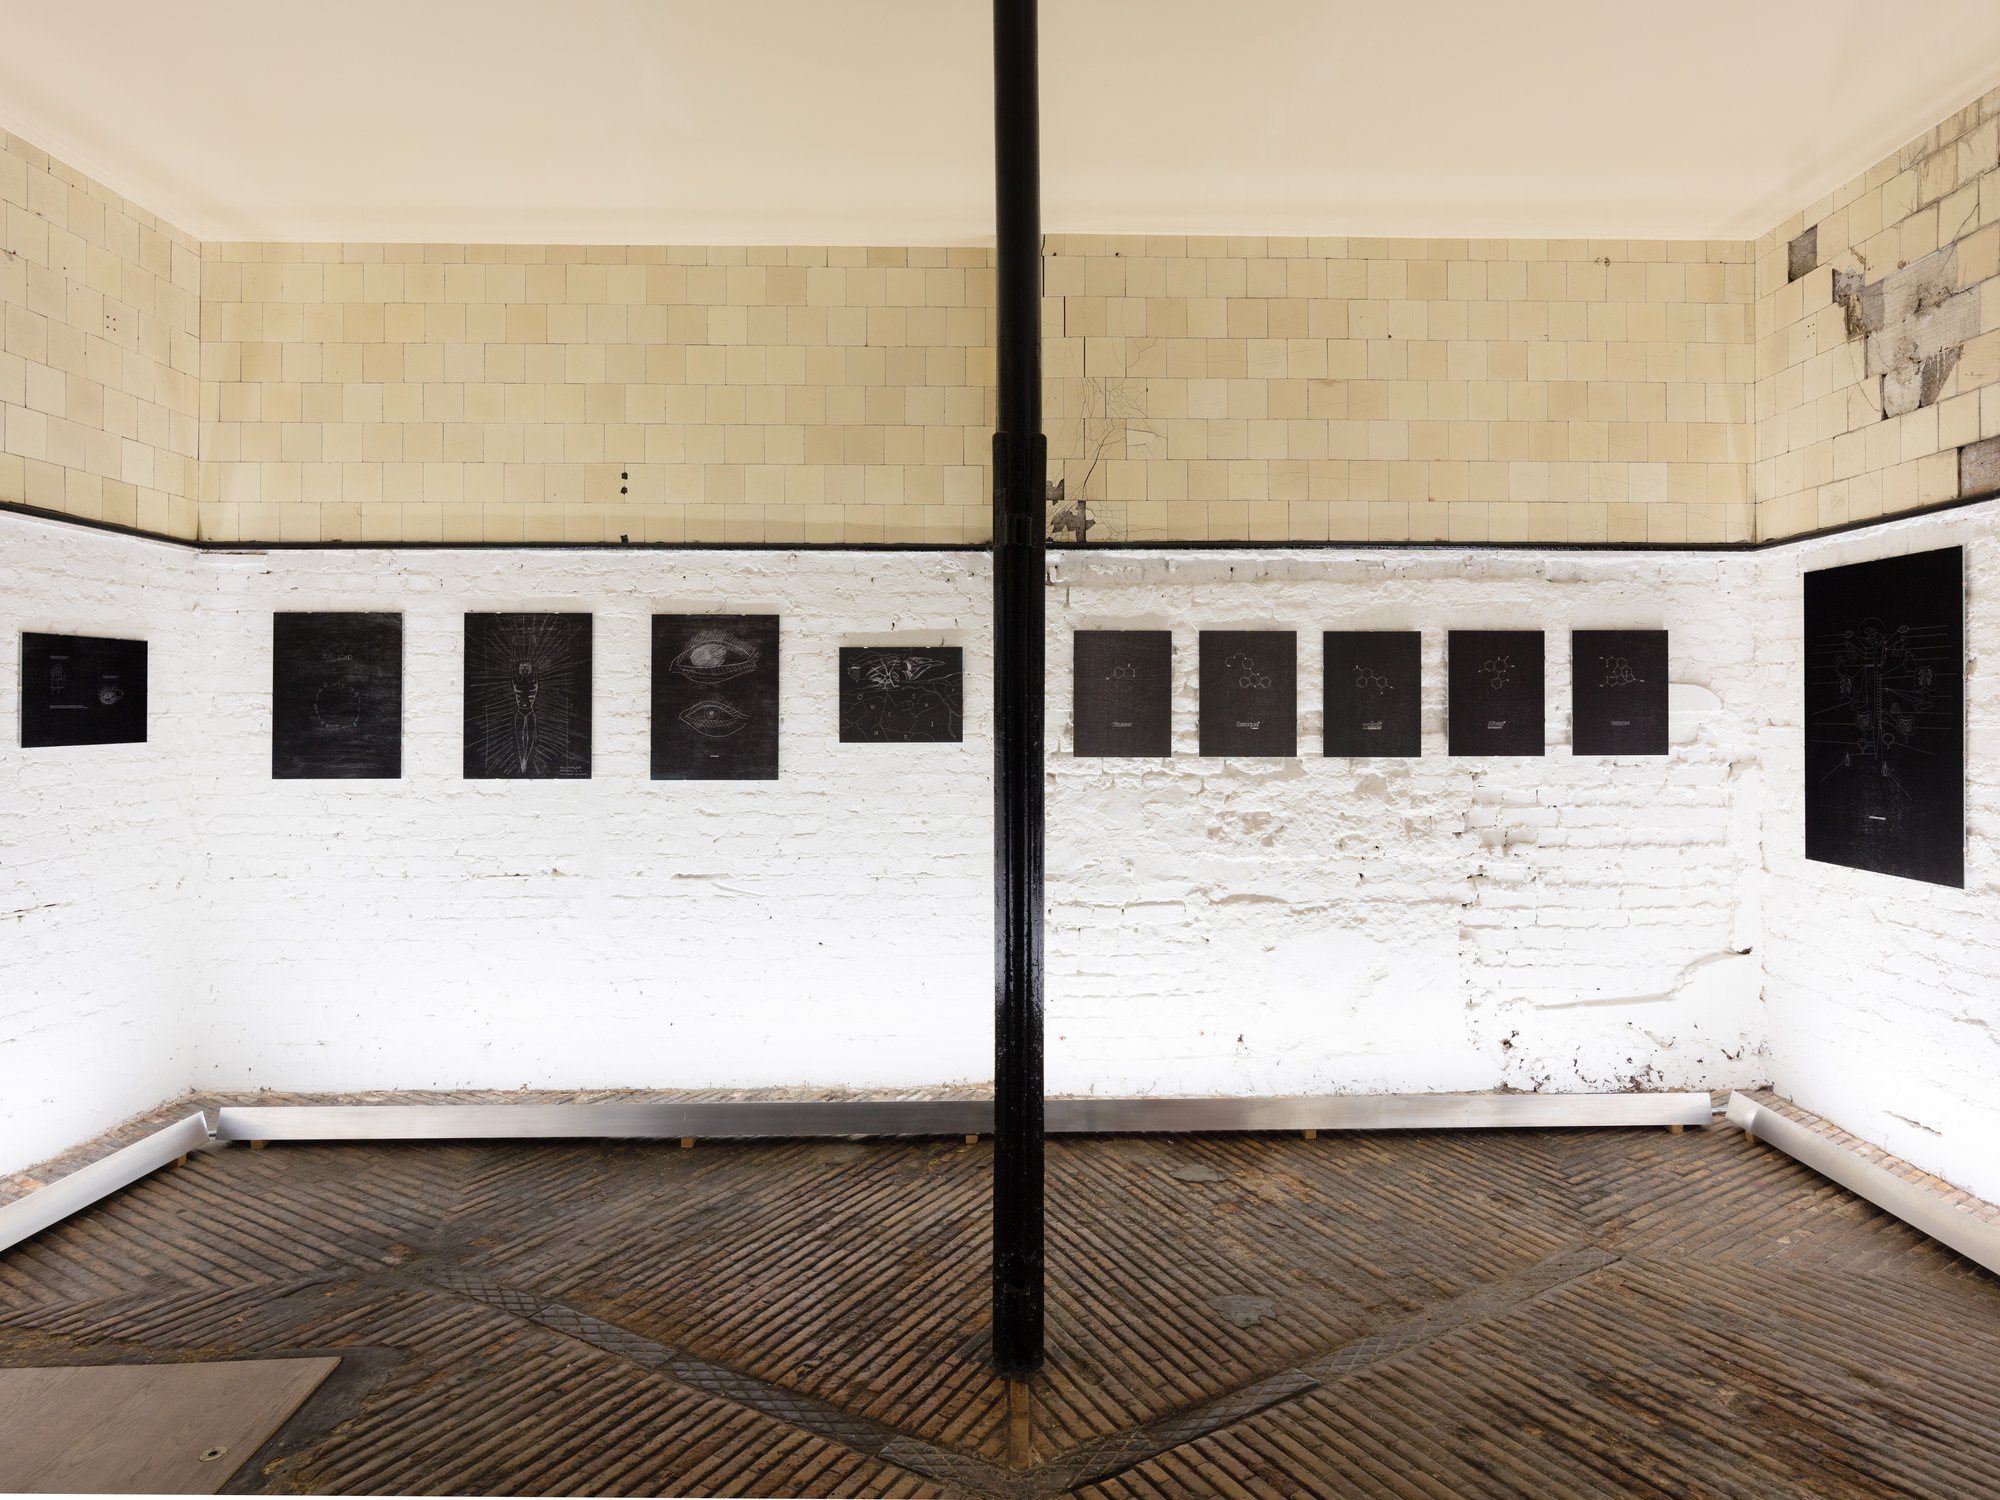 Installation view, Sidsel Meineche Hansen, home vs owner, Rodeo, London, 2020